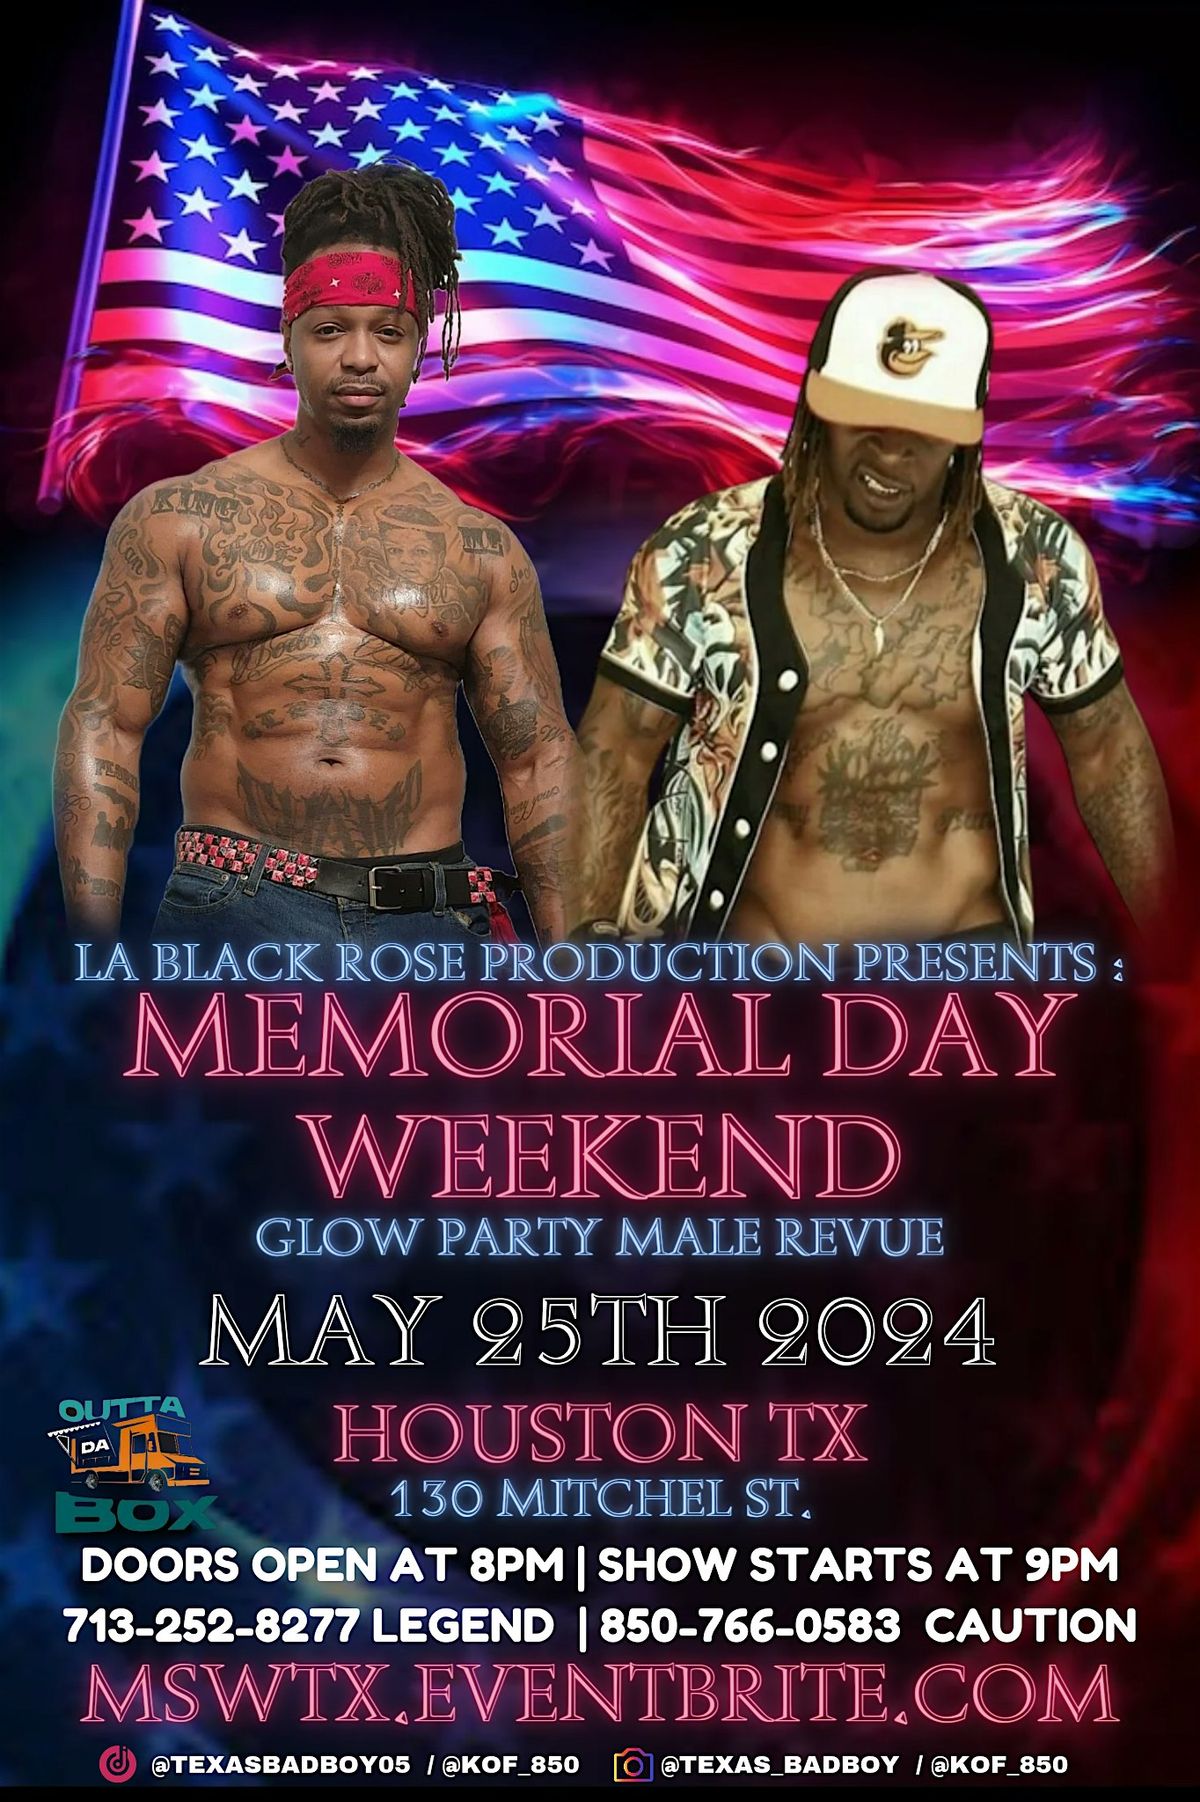 LaBlackrose Productions Presents Memorial Day Glow Party